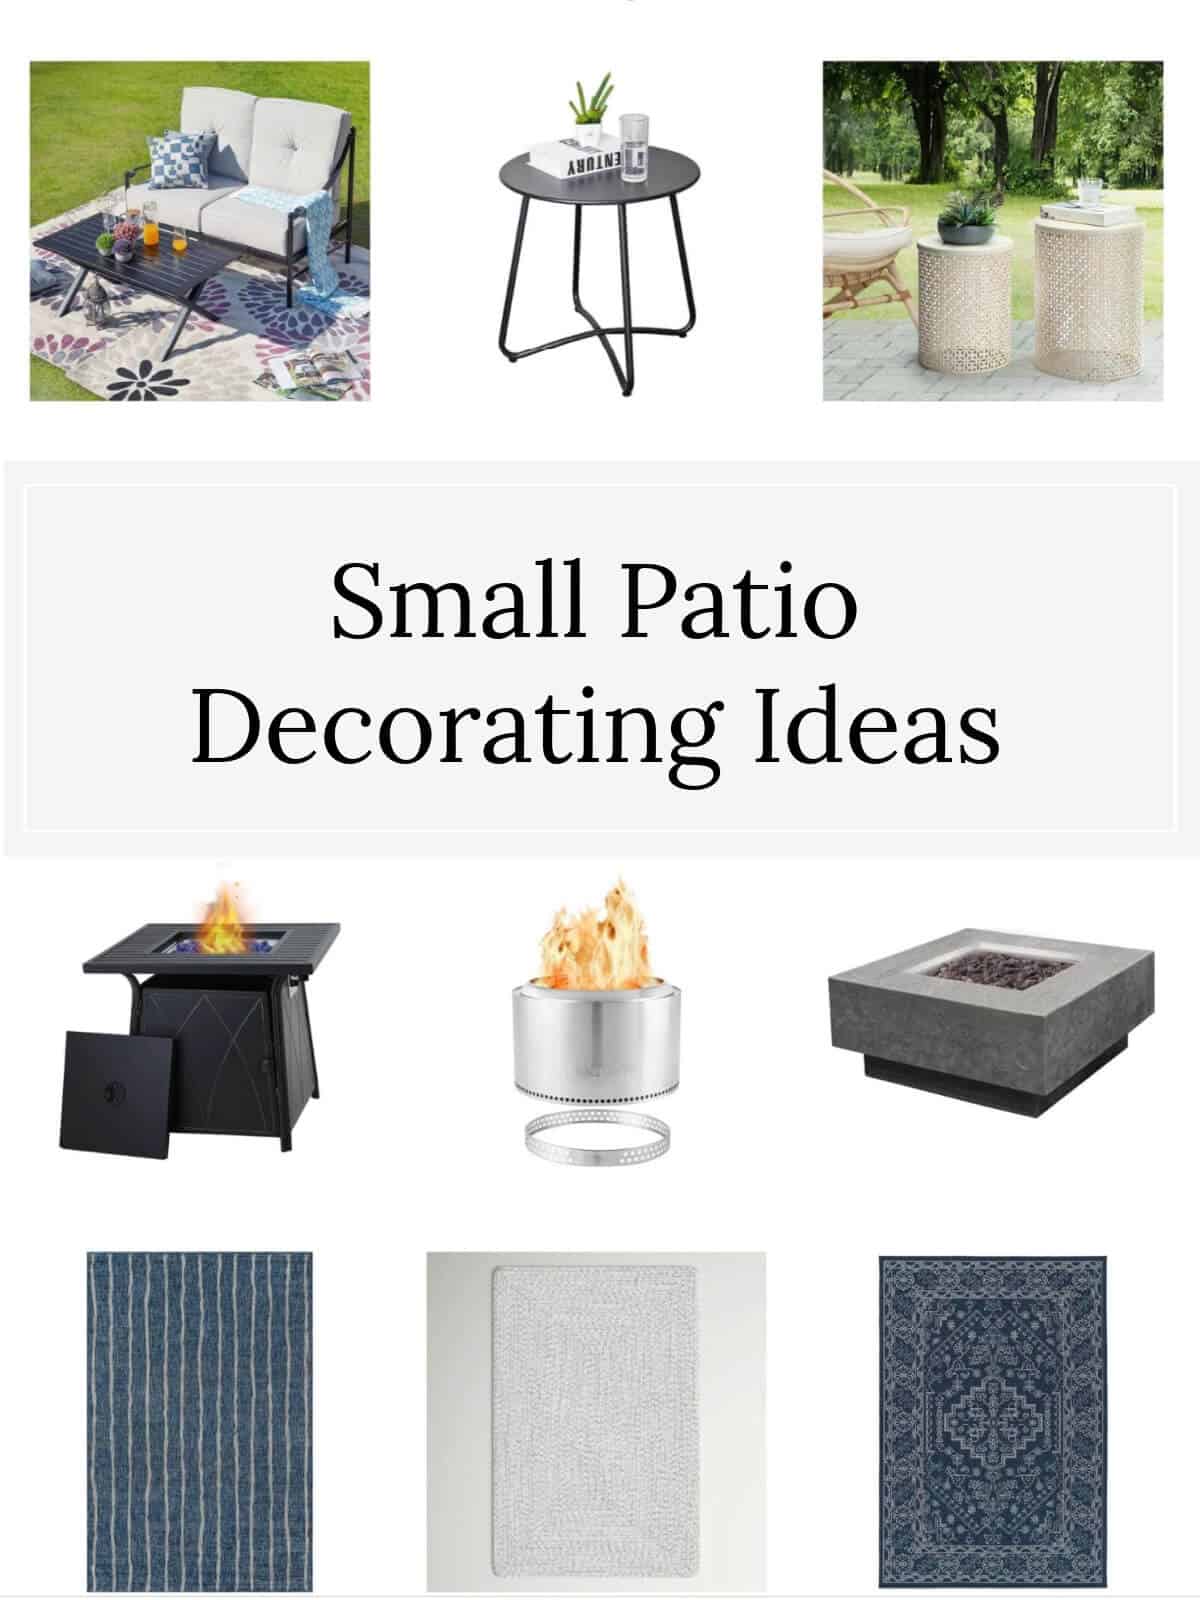 Small Patio Decorating Ideas with Wayfair Finds